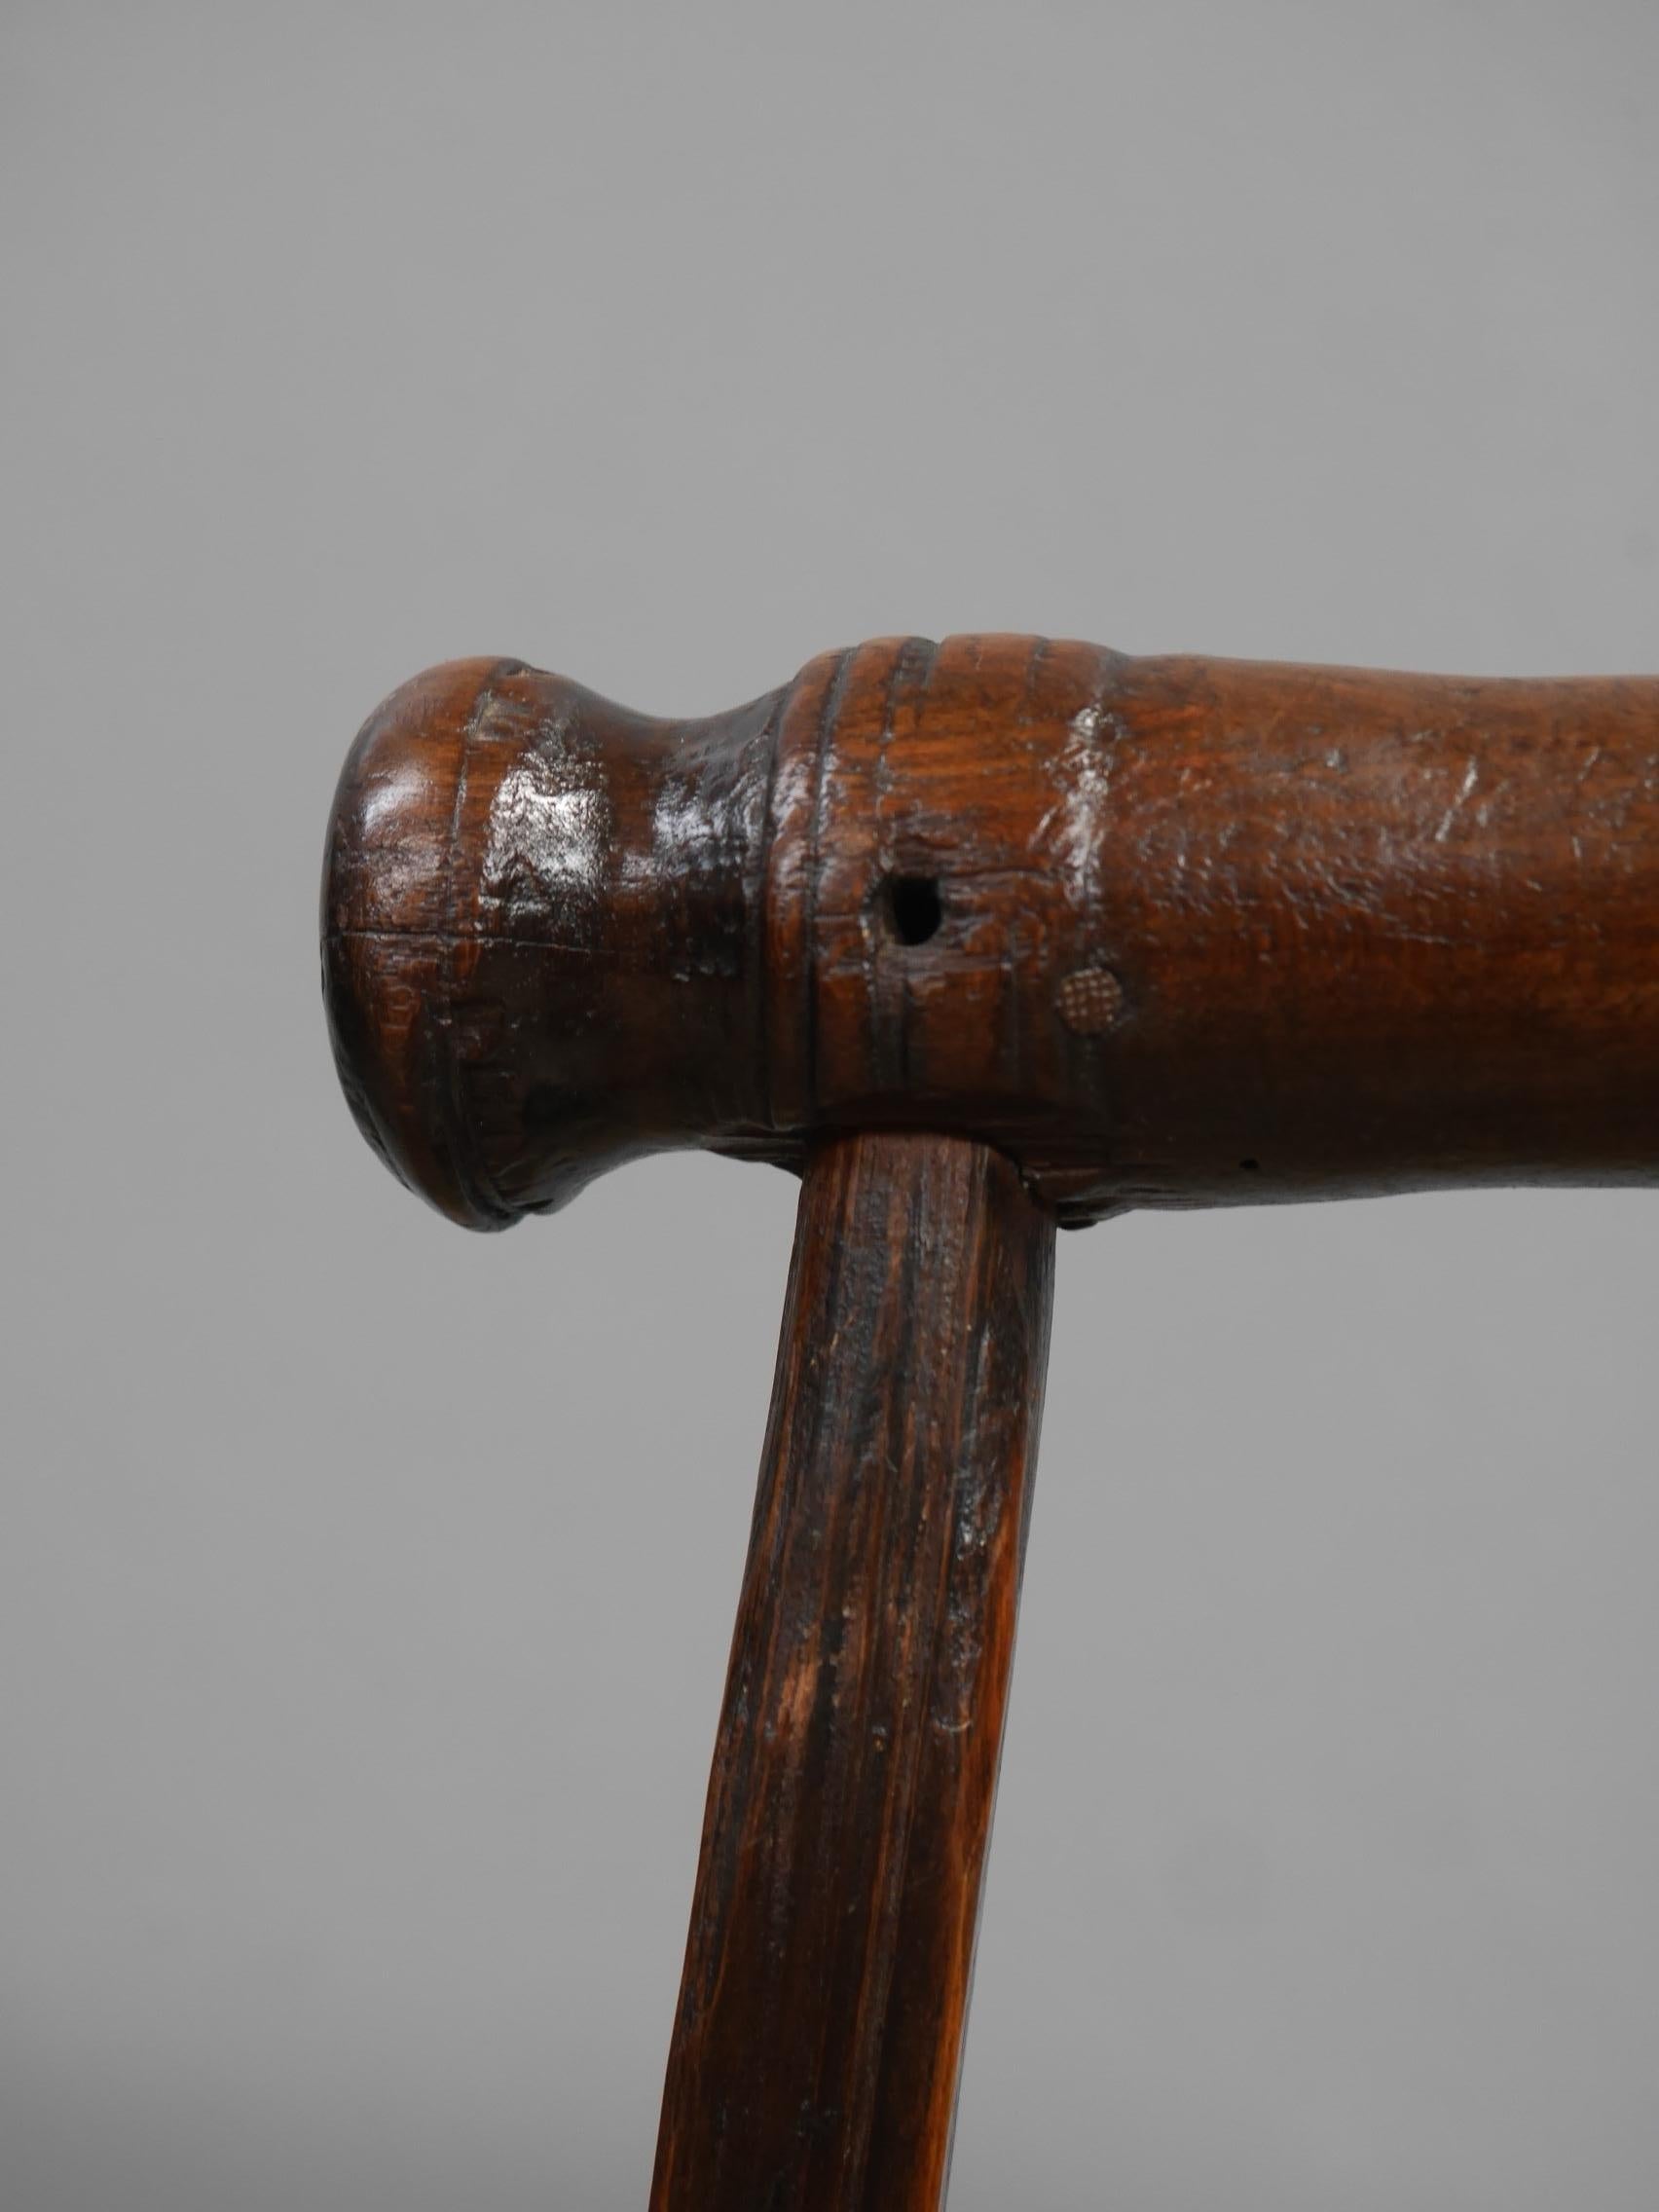 An early antique cock fighting stand.
A beautiful, very unusual & scarce surviving piece of folk art of excellent form, with interesting if slightly macabre provenance. 
In mixed hardwood, the hand-turned perch is supported by three legs above a